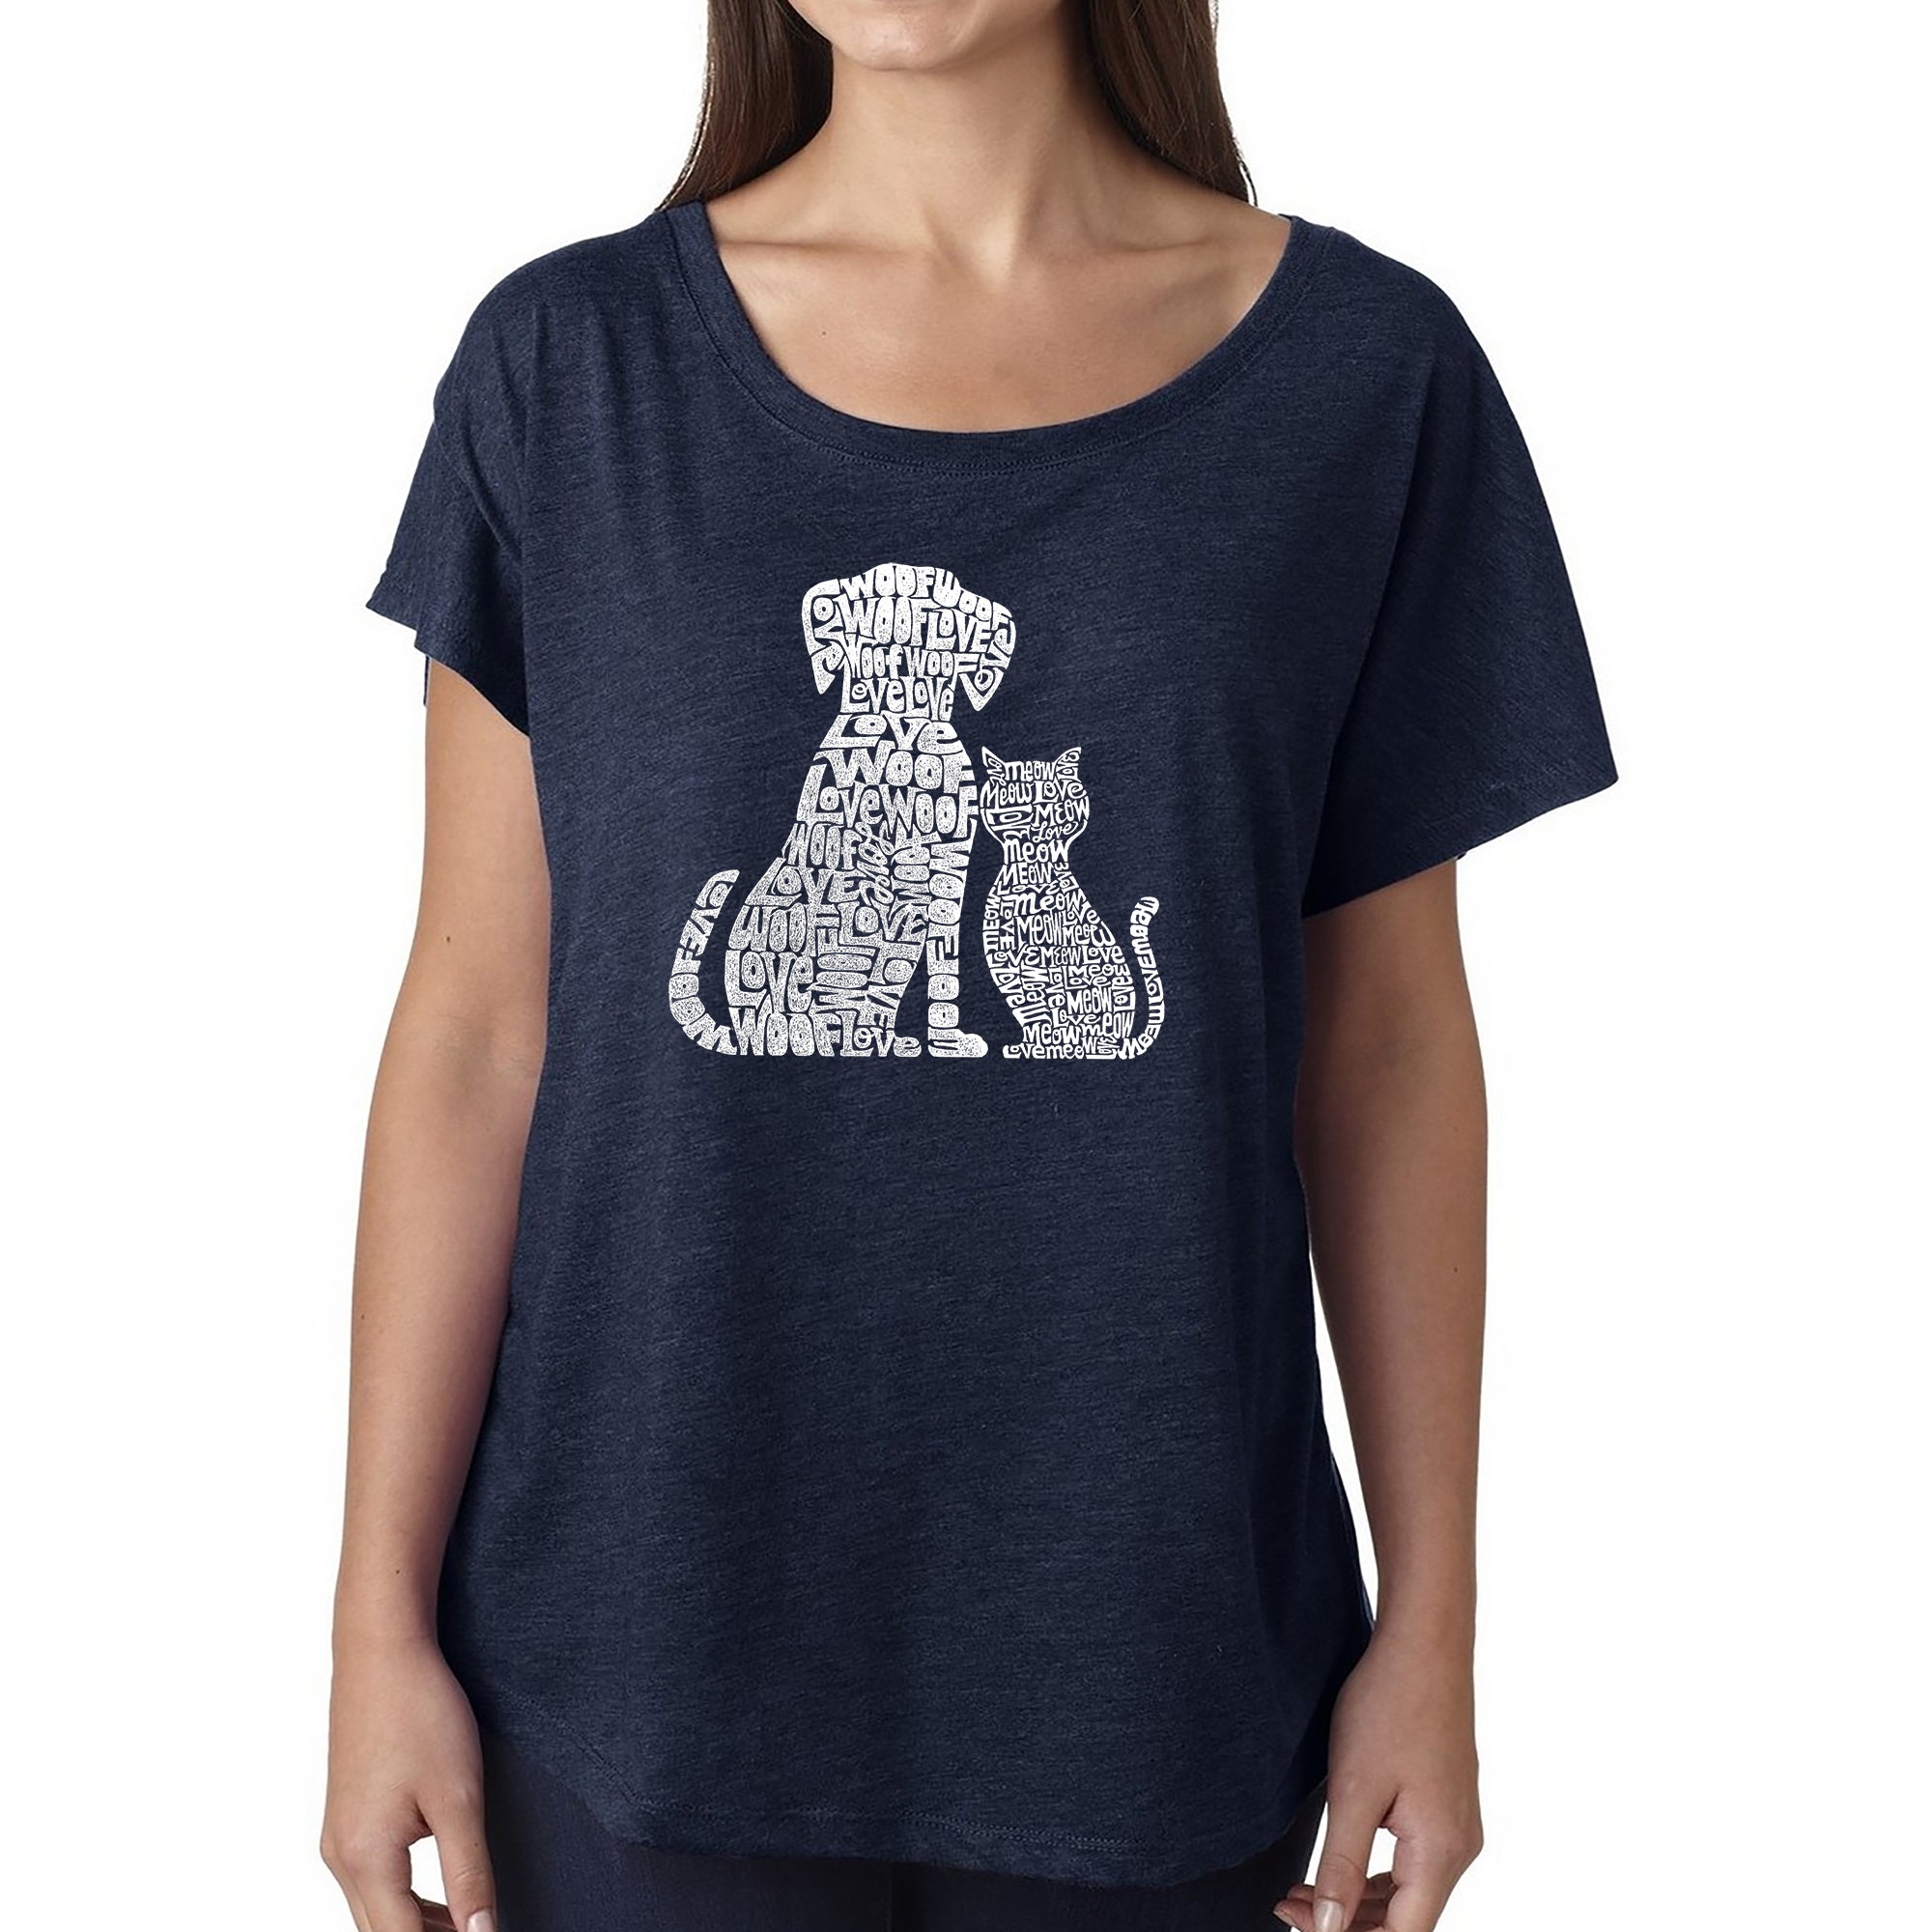 Dogs And Cats - Women's Loose Fit Dolman Cut Word Art Shirt - Navy - XX-Large